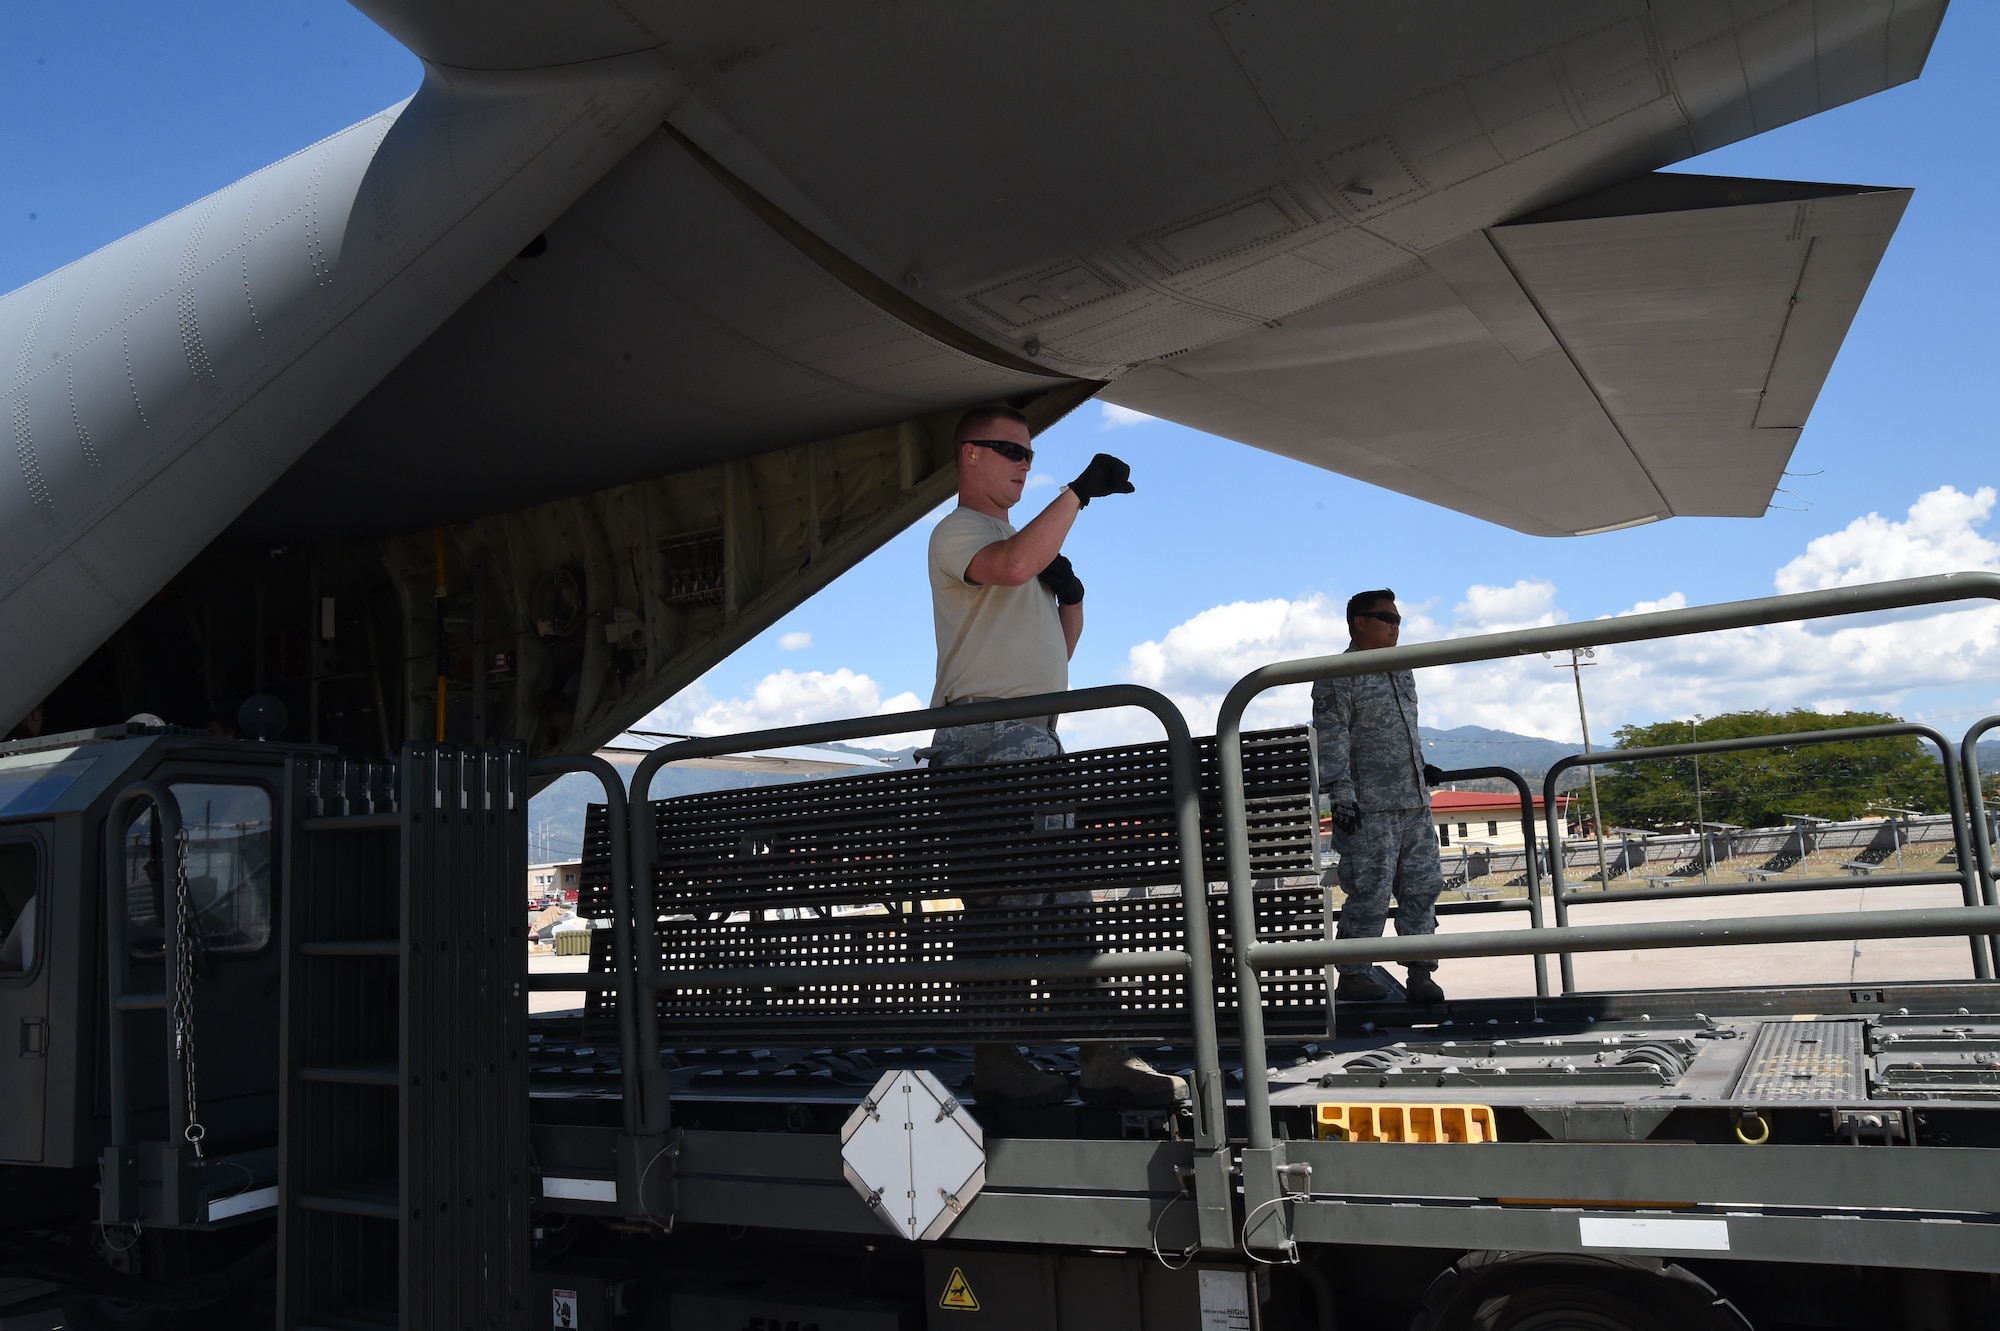 U.S. Air Force Staff Sgt. Dale Periman, 612th Air Base Squadron, gives directions to a driver while unloading cargo on Soto Cano Air Base, Honduras, Jan. 7, 2016. The cargo was delivered  by use of the Denton Program, a program created to allow donated humanitarian goods the ability to use space available on military cargo aircraft. (U.S. Air Force photo by Martin Chahin/Released)